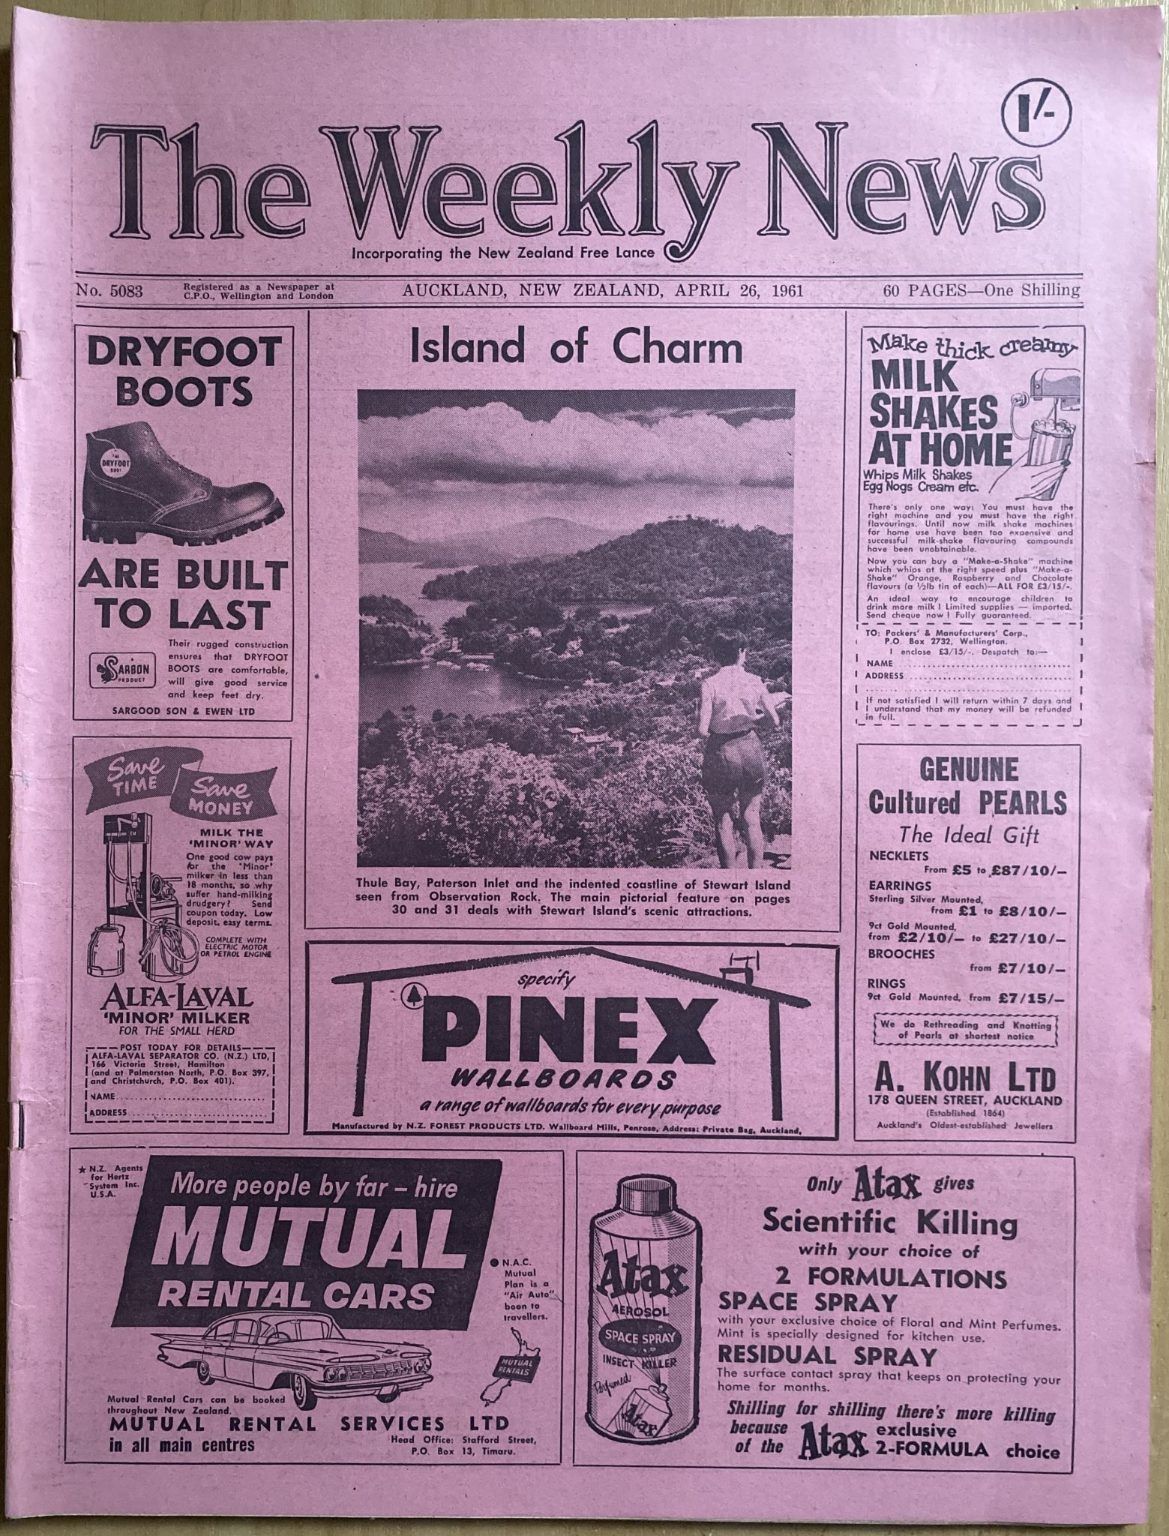 OLD NEWSPAPER: The Weekly News, No. 5083, 26 April 1961